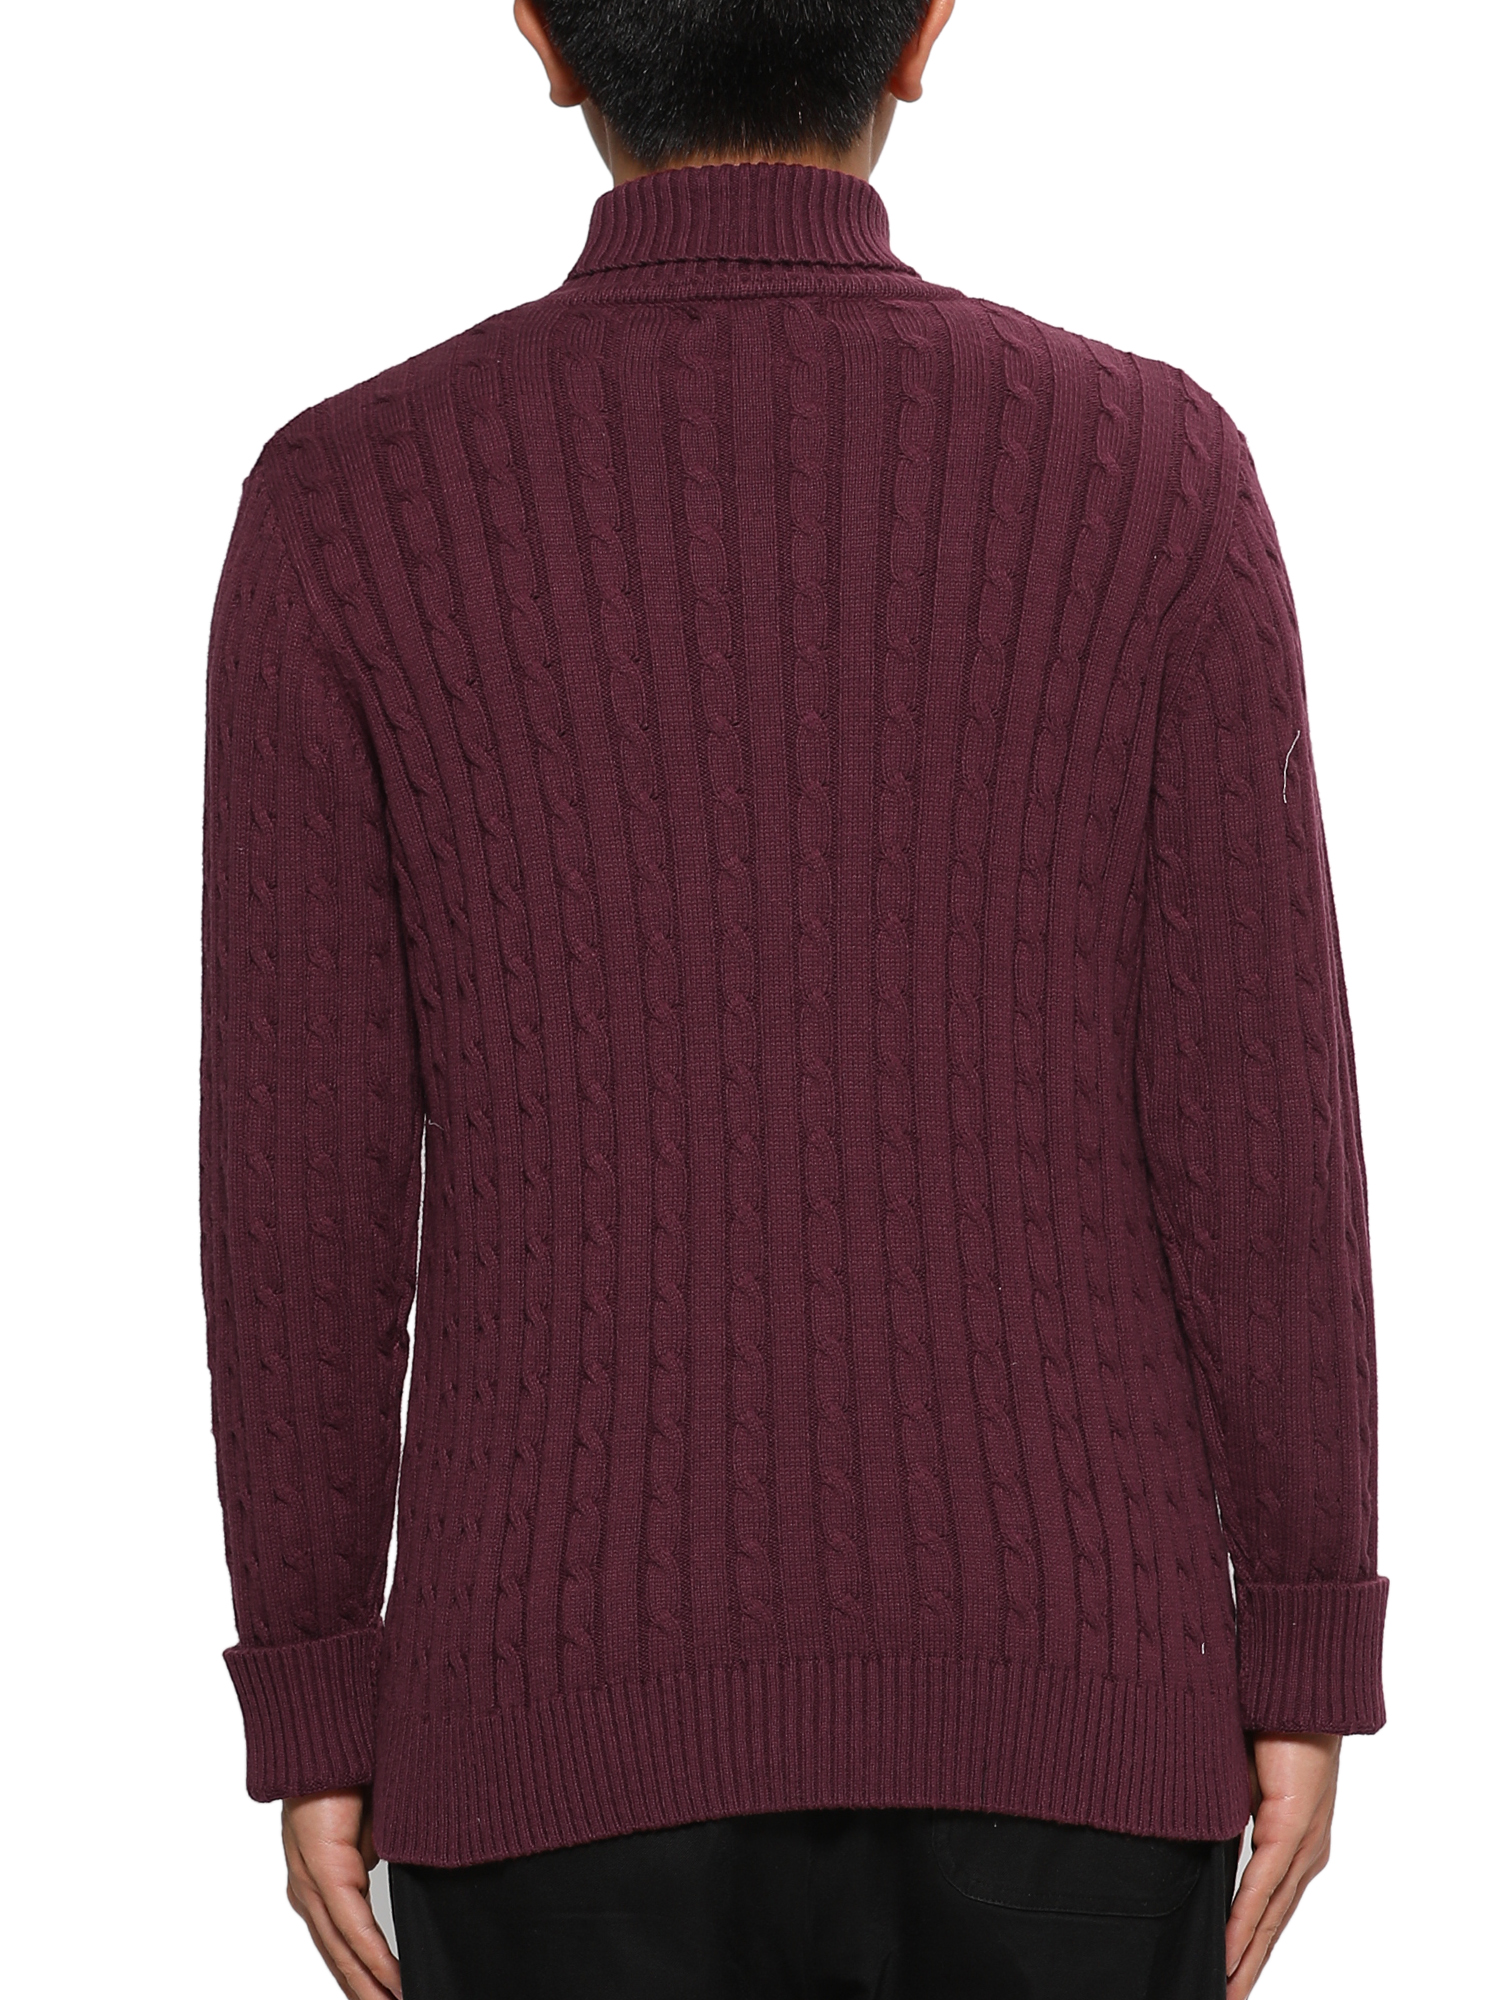 Unique Bargains Men's Turtleneck Long Sleeves Pullover Cable Knit Sweater - image 3 of 4